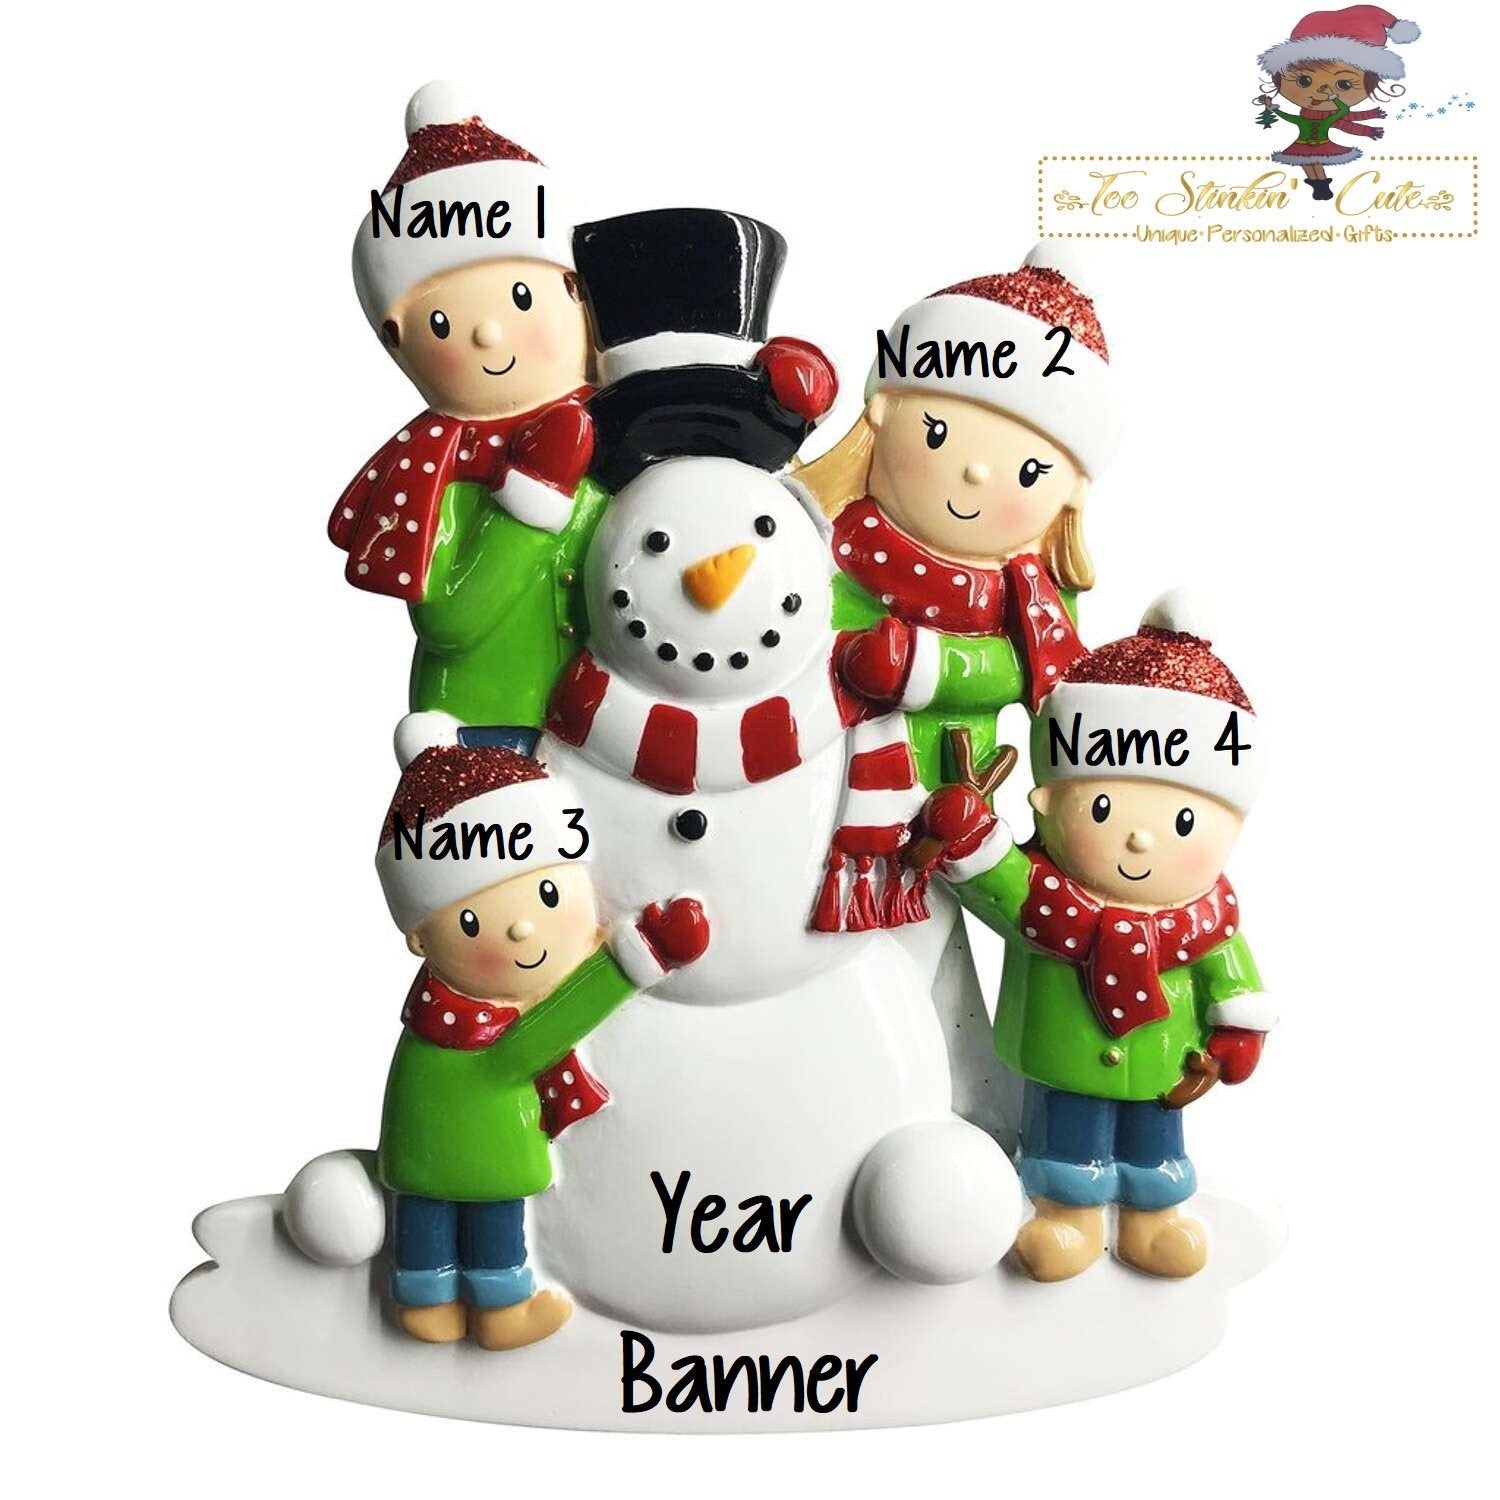 Christmas Ornament Building a Snowman Family of 4/ Friends Coworkers Employees - Personalized + Free Shipping!